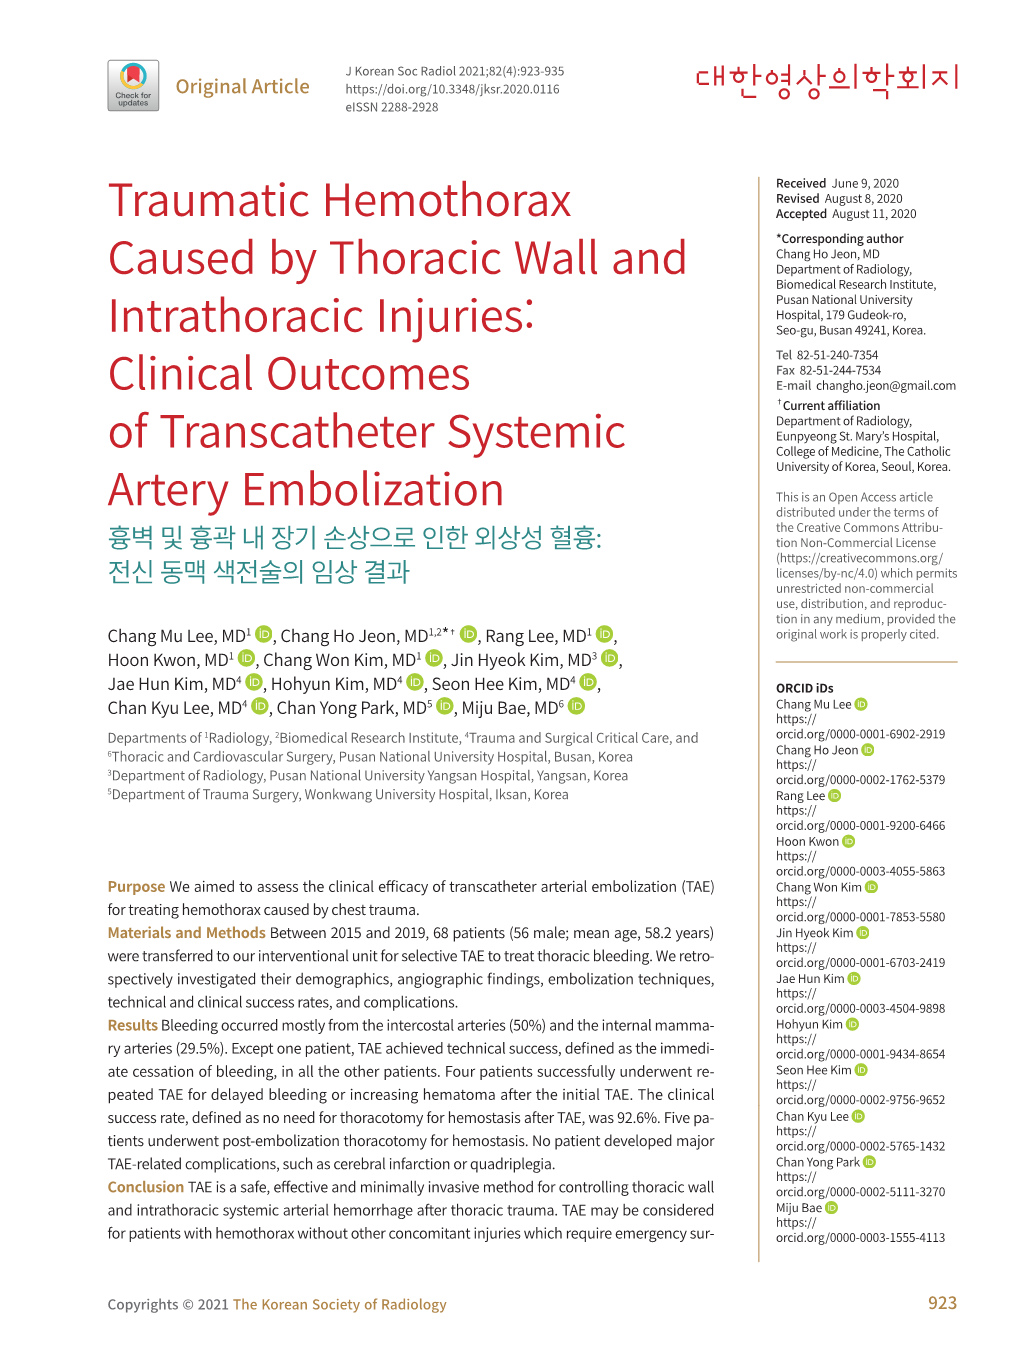 Traumatic Hemothorax Caused by Thoracic Wall and Intrathoracic